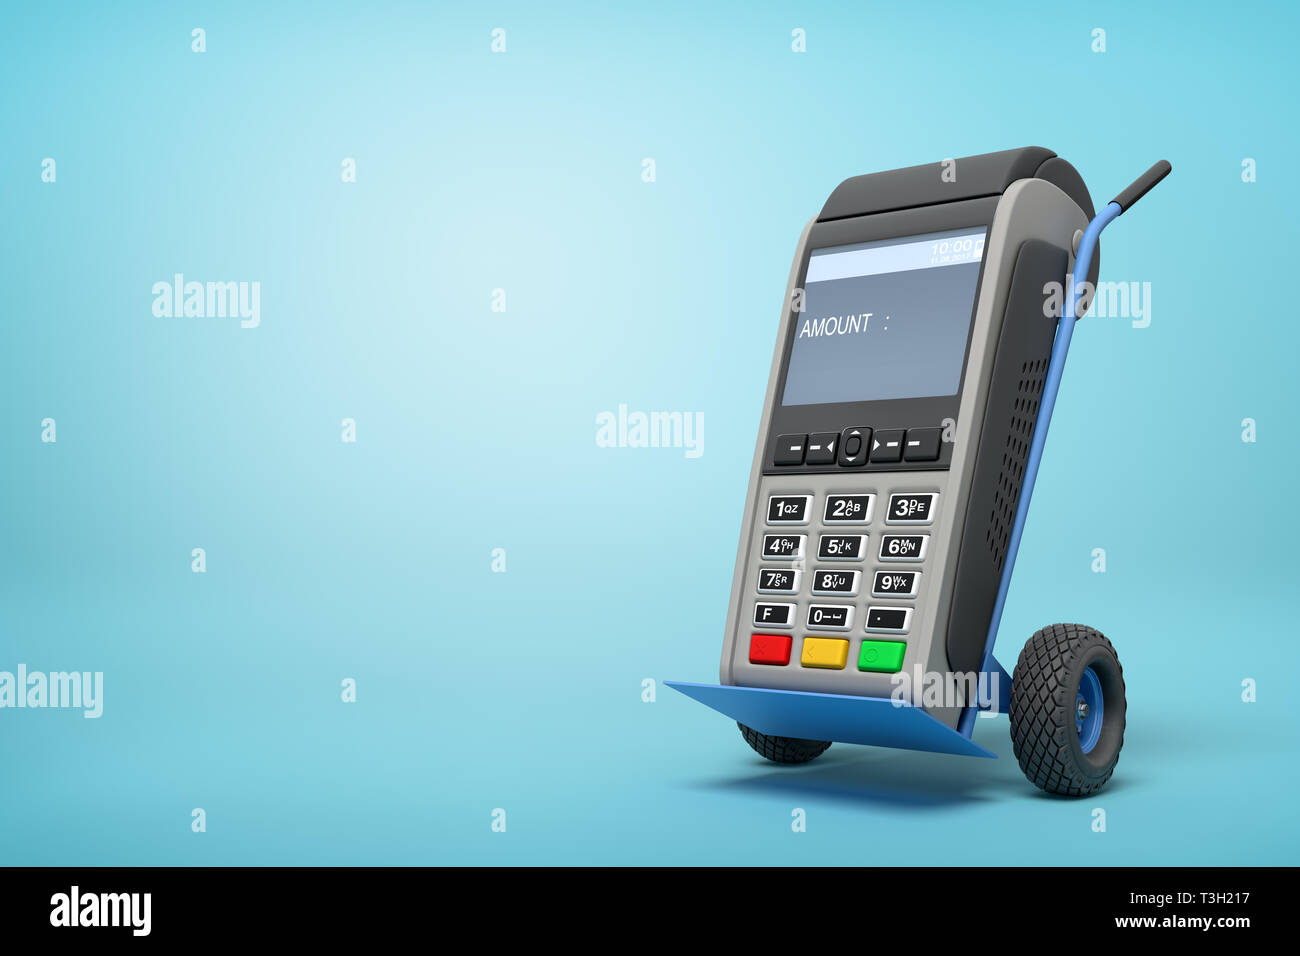 3d rendering of blue hand truck with grey point-of-sale terminal on top on light-blue background with copy space. Stock Photo